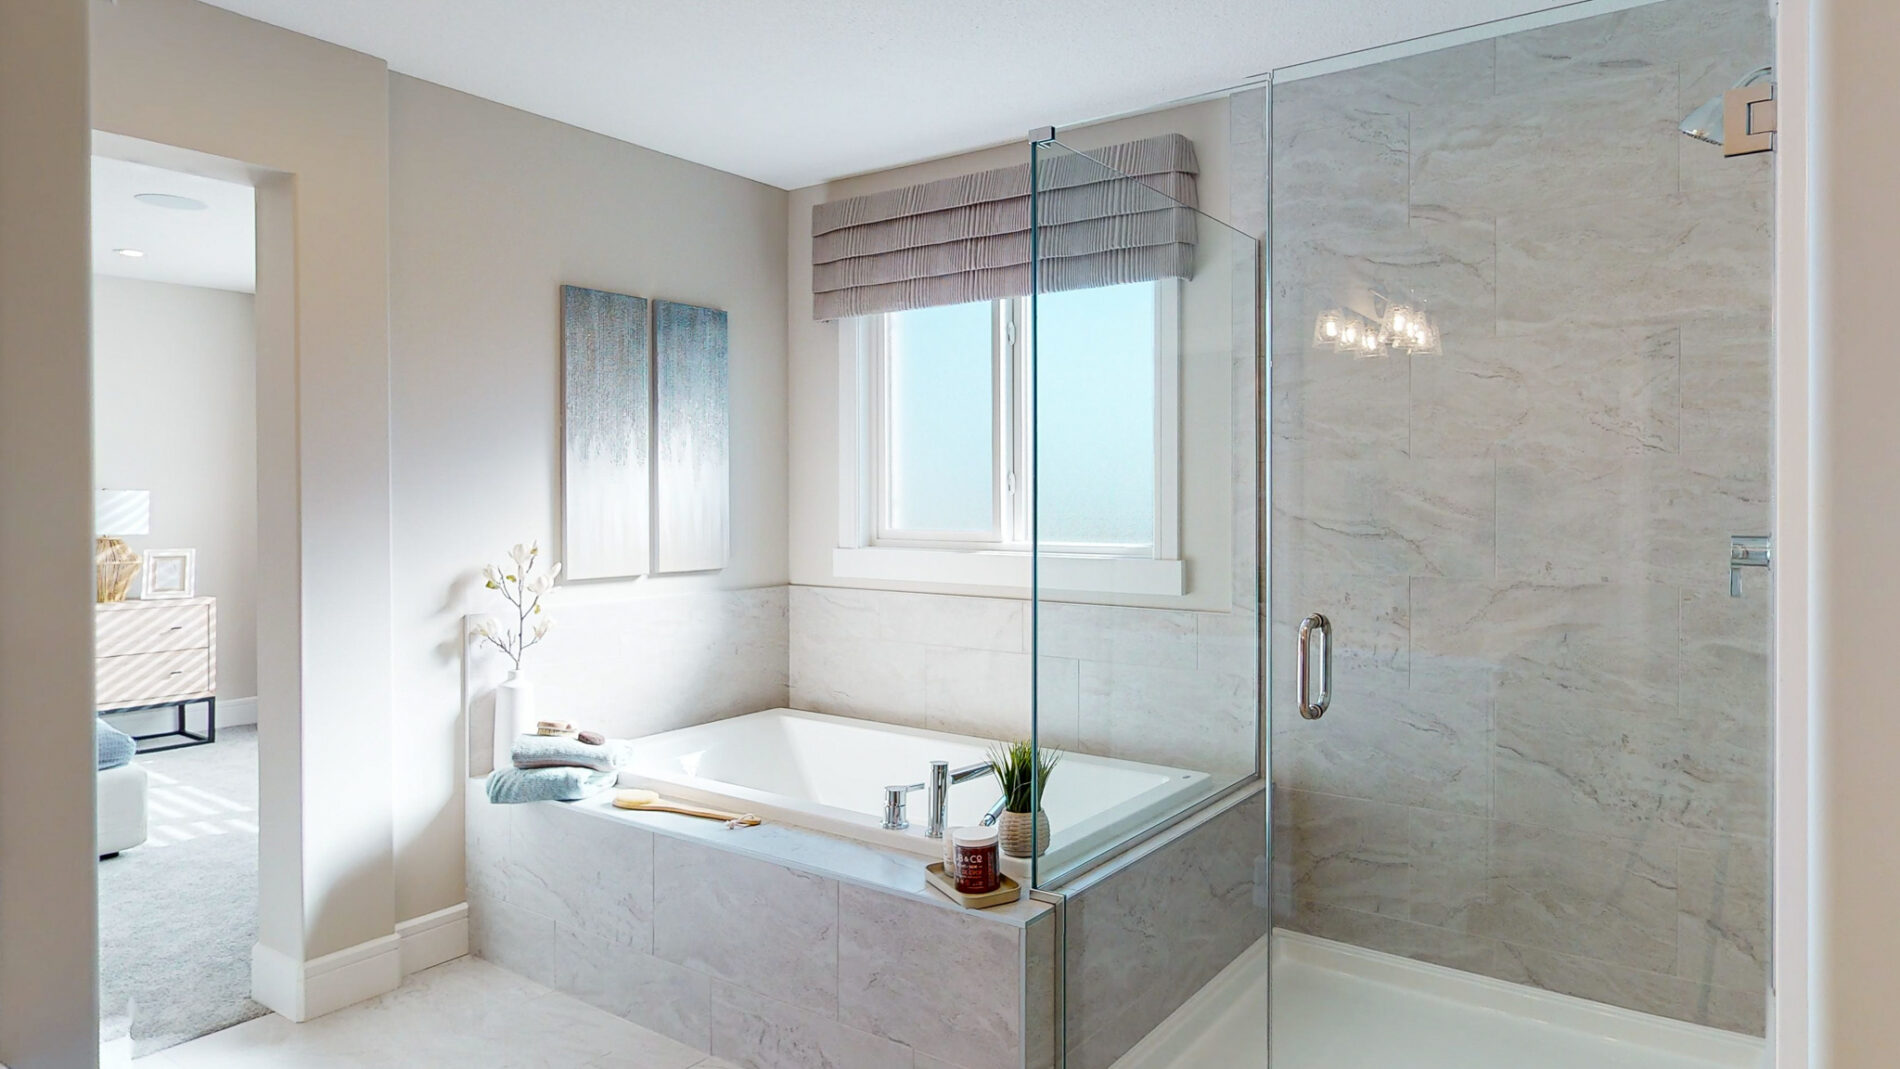 Natural light floods in through the window above the soaker tub next to the glass enclosed, fully tiles shower of the Kalliope Showhome